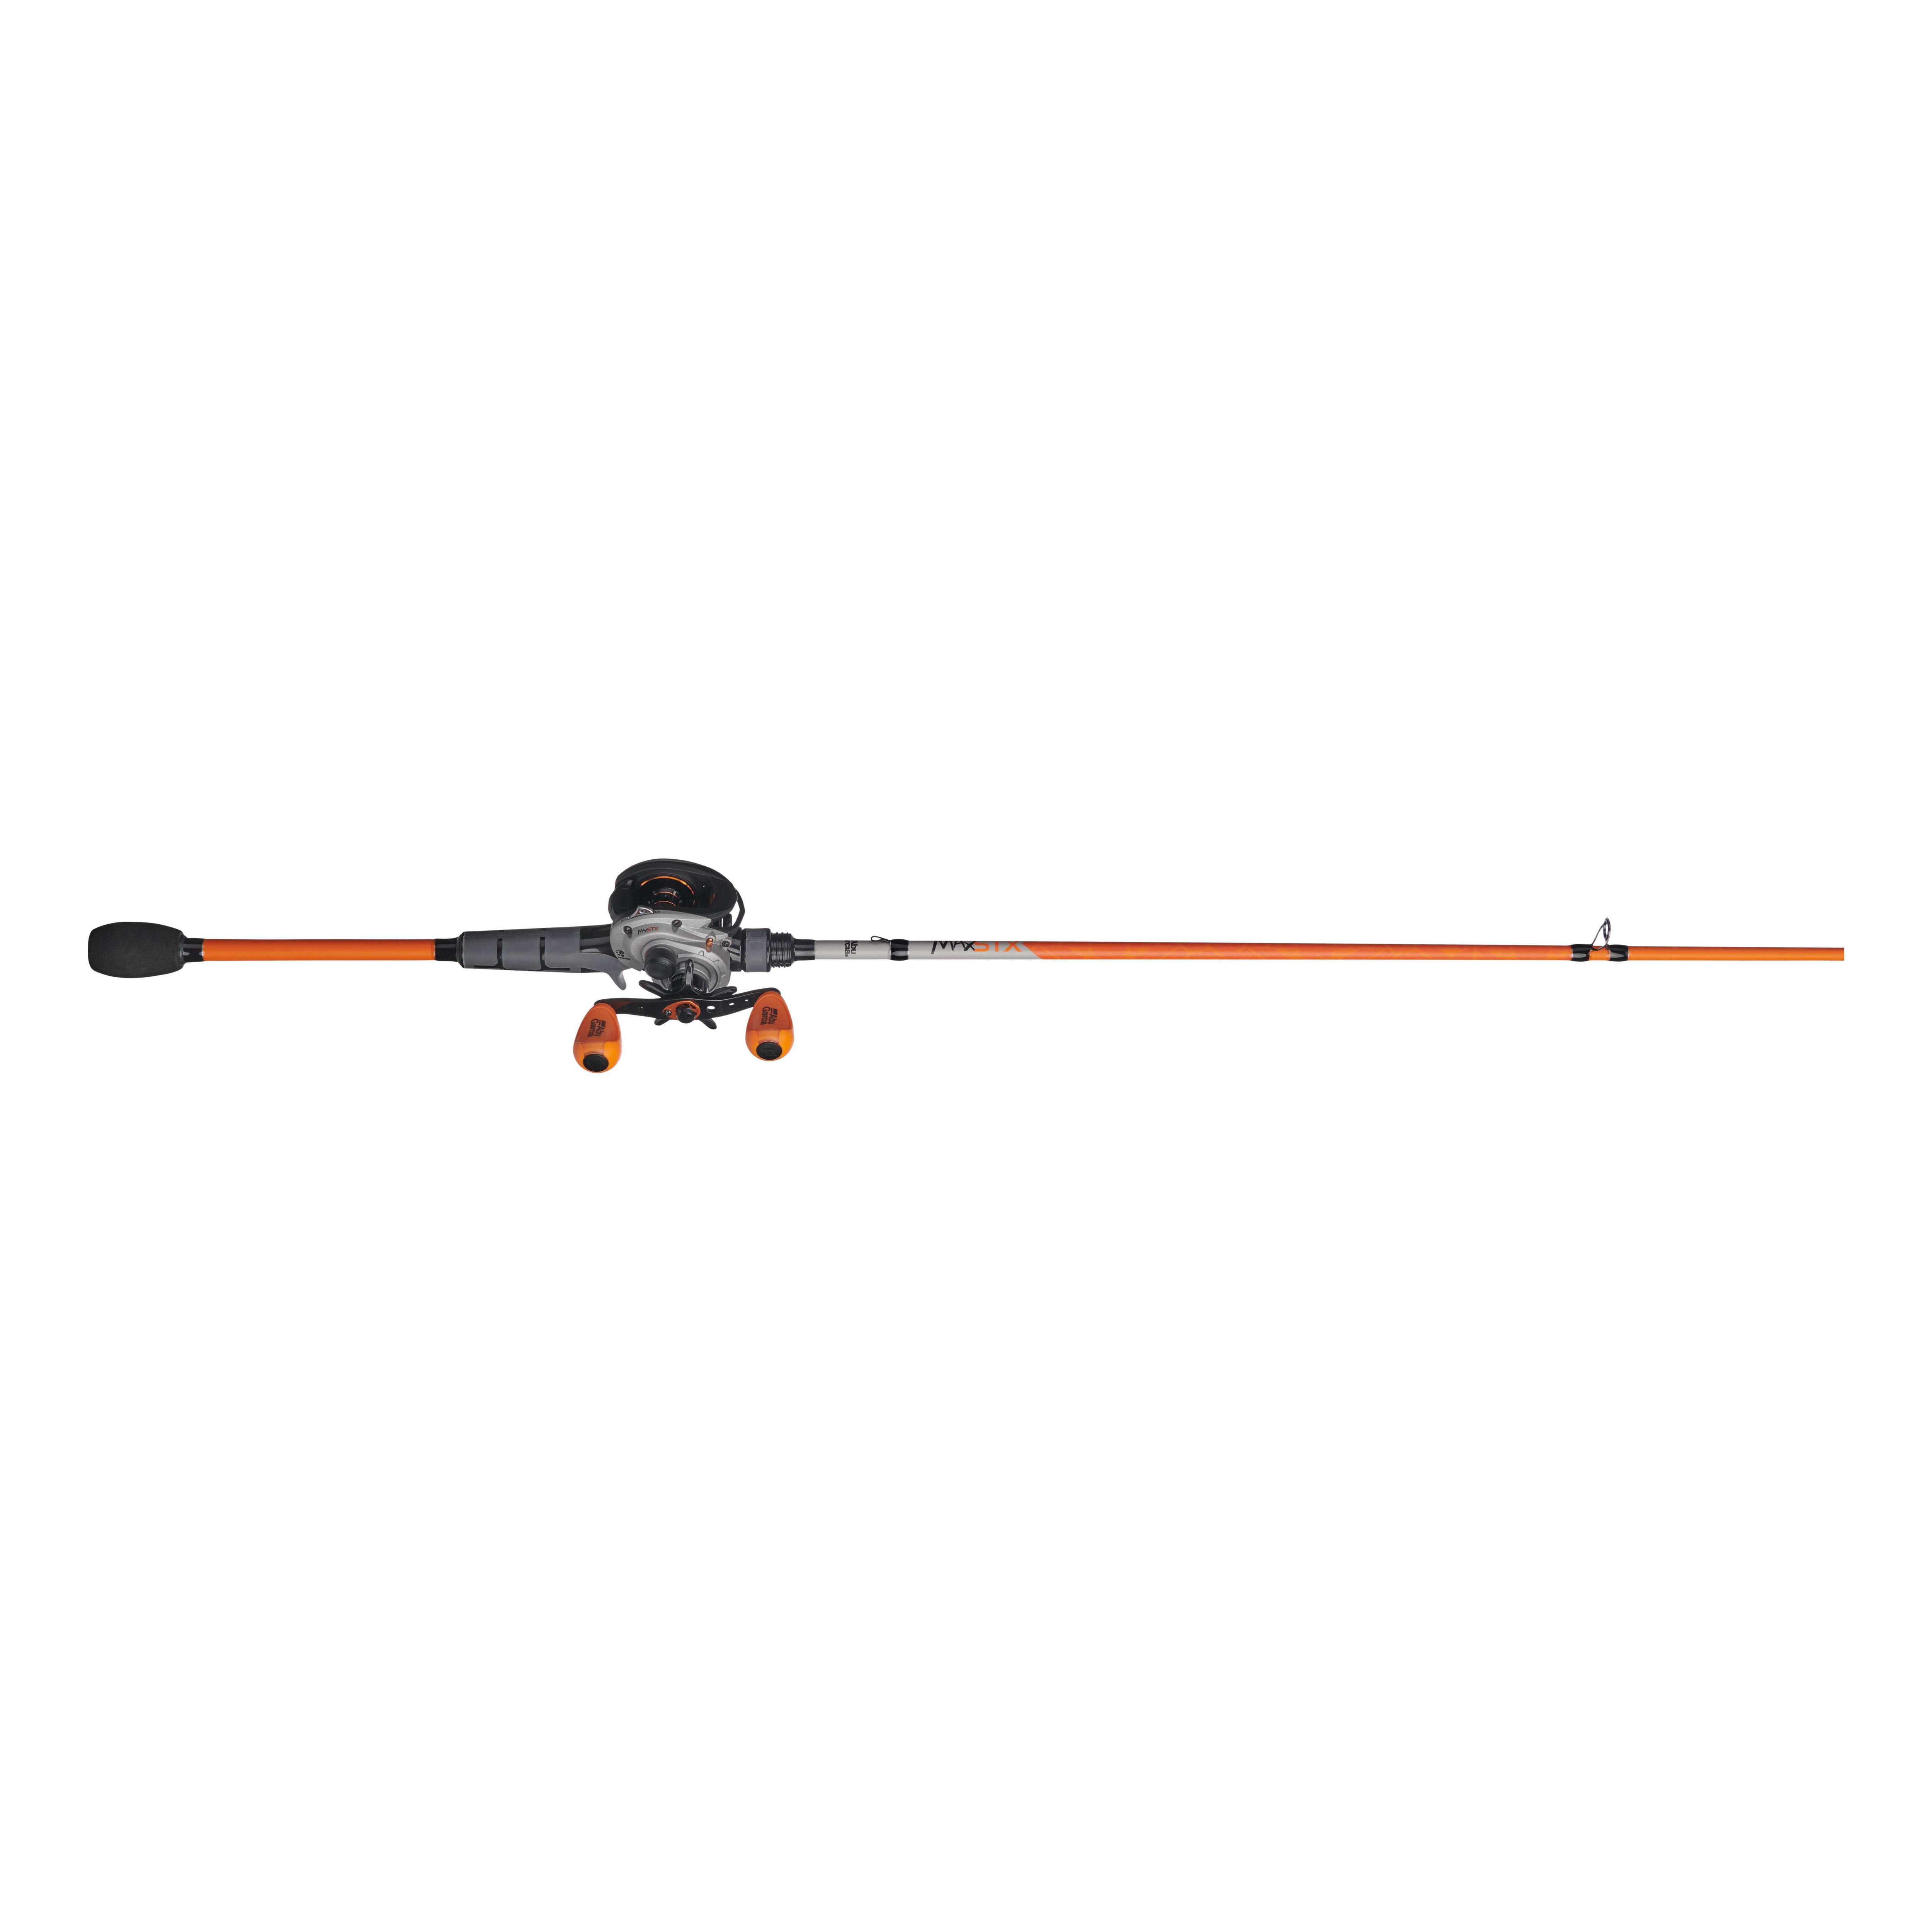 Abu Garcia Max Z Combo  Add a fresh piece of gear to your arsenal. Grab  the new Abu Garcia Max Z combo. With high-performance comfort grips, and a  lightweight graphite body